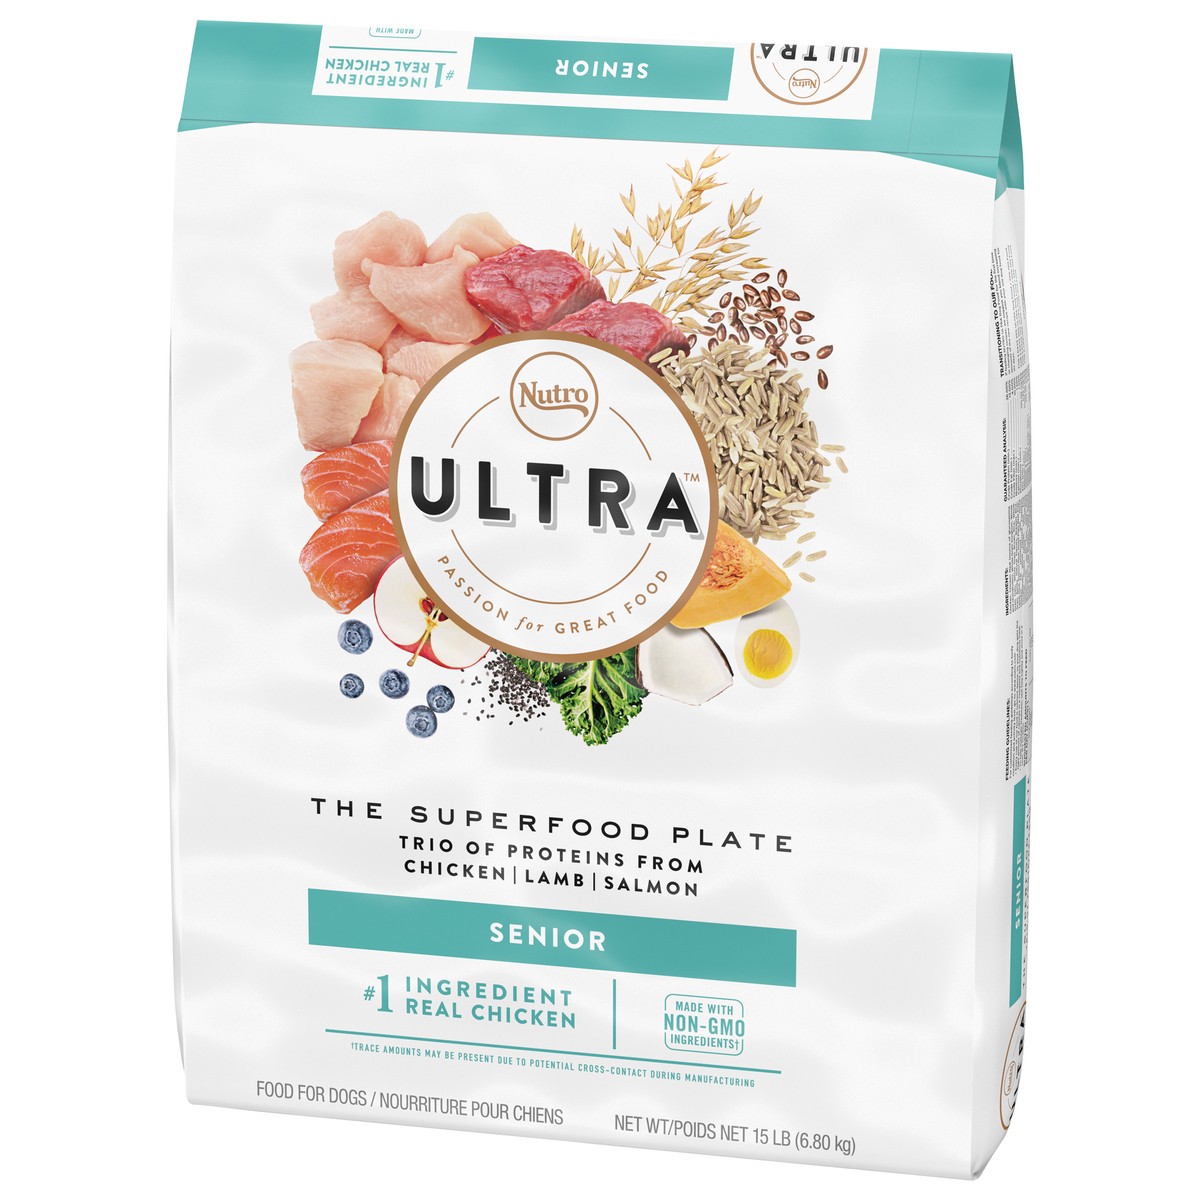 slide 11 of 16, NUTRO ULTRA Senior High Protein Natural Dry Dog Food with a Trio of Proteins from Chicken, Lamb and Salmon, 15 lb. Bag, 15 Lb